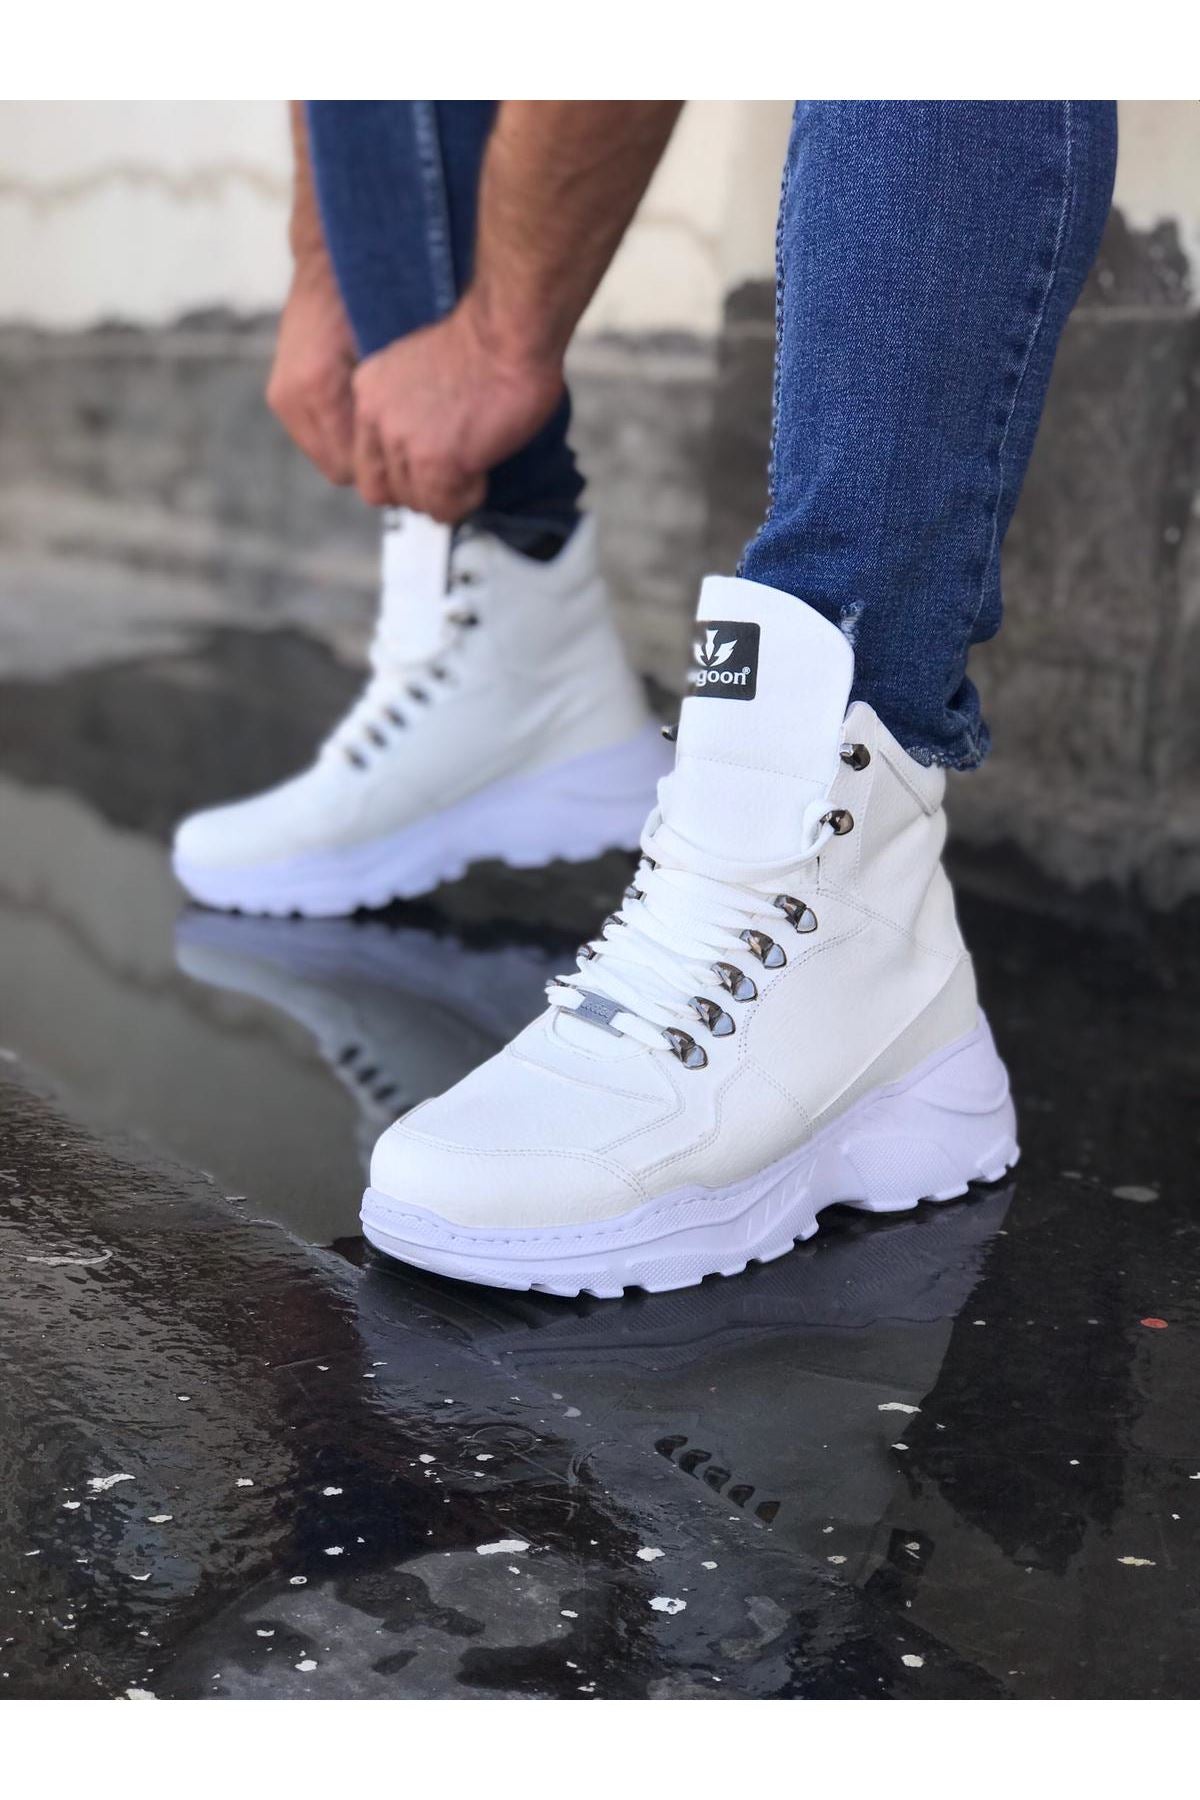 Original Design WG07 White Color Long Lace-up Boots - STREETMODE ™